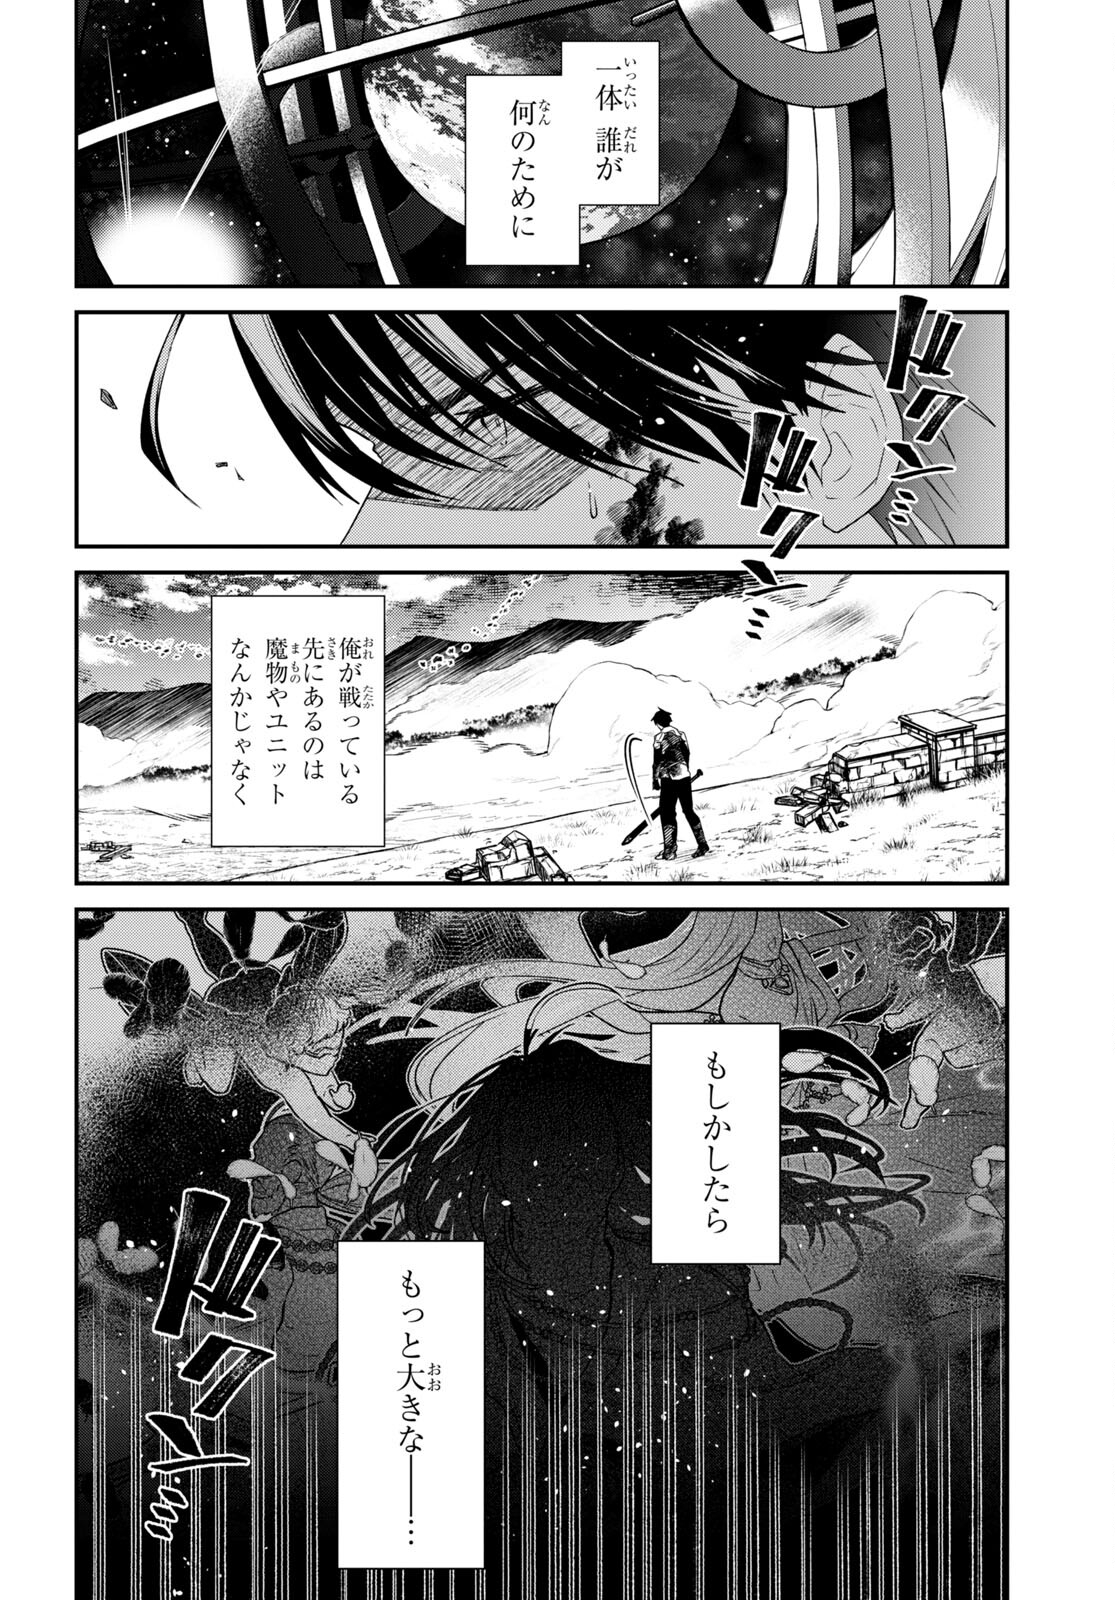 29-Years-Old Bachelor Was… Brought to a Different World to Live Freely 第34.3話 - Page 12